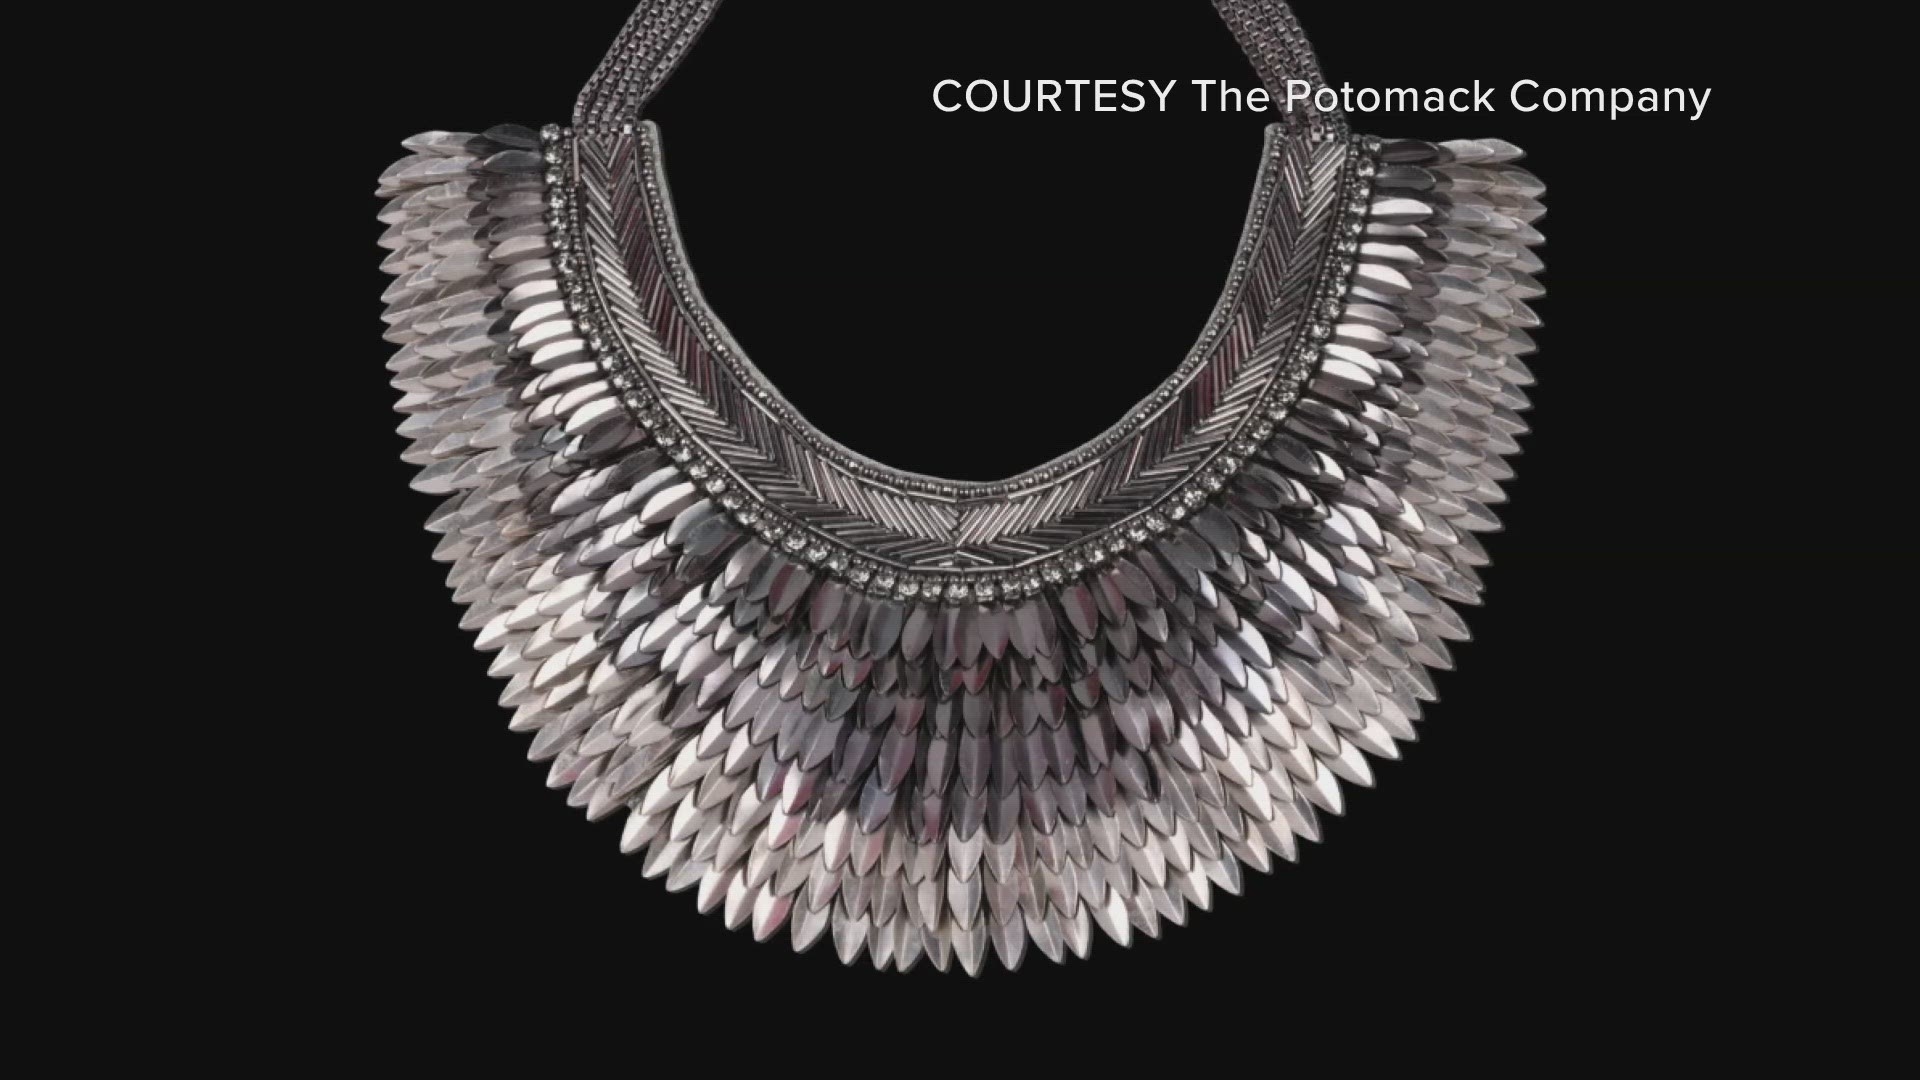 This collar is meant to evoke power and strength due to the imagery of battle armor in its layered metal pointed feathers.